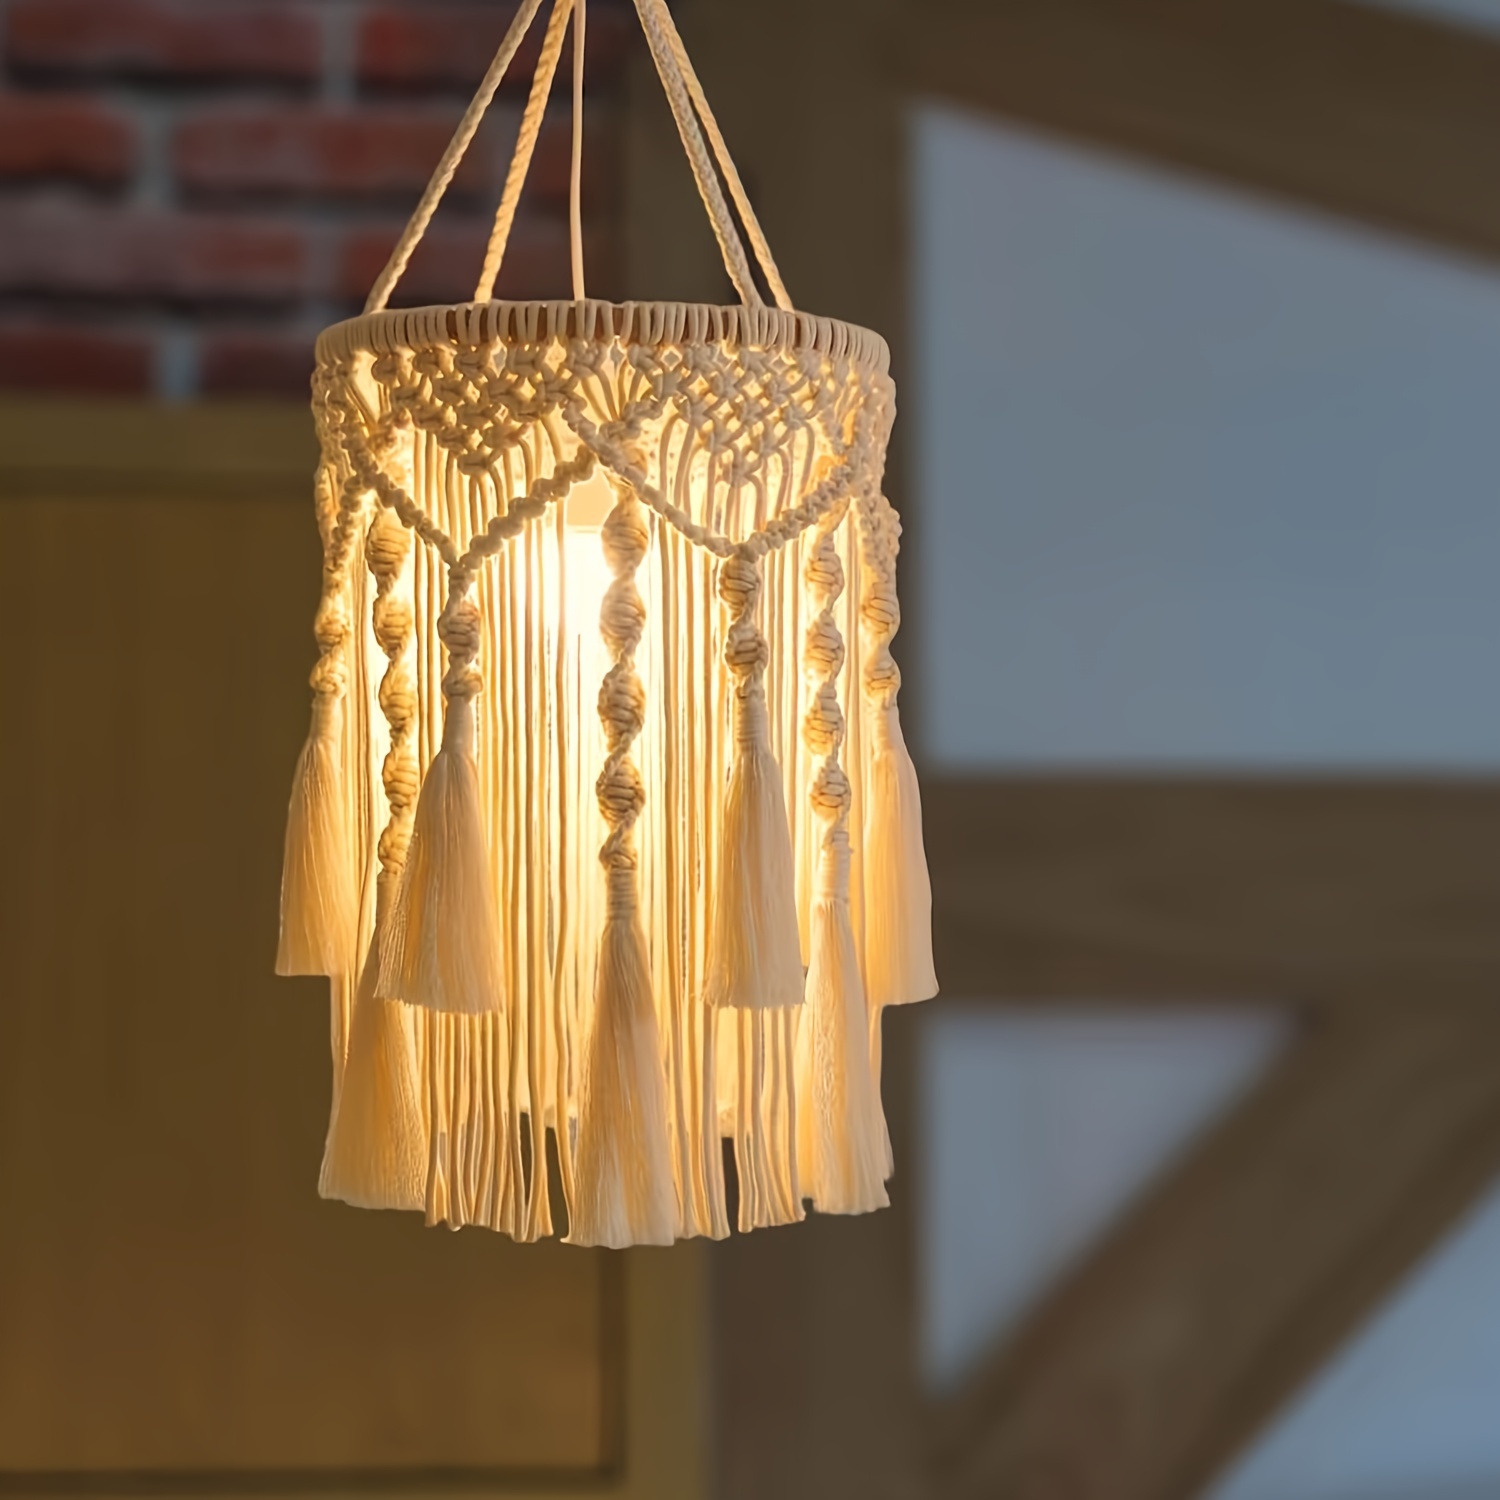 

1pc, Bohemian Handwoven Hanging Pendant Light Cover, Boho Chic Home Decor, Ceiling Lampshade